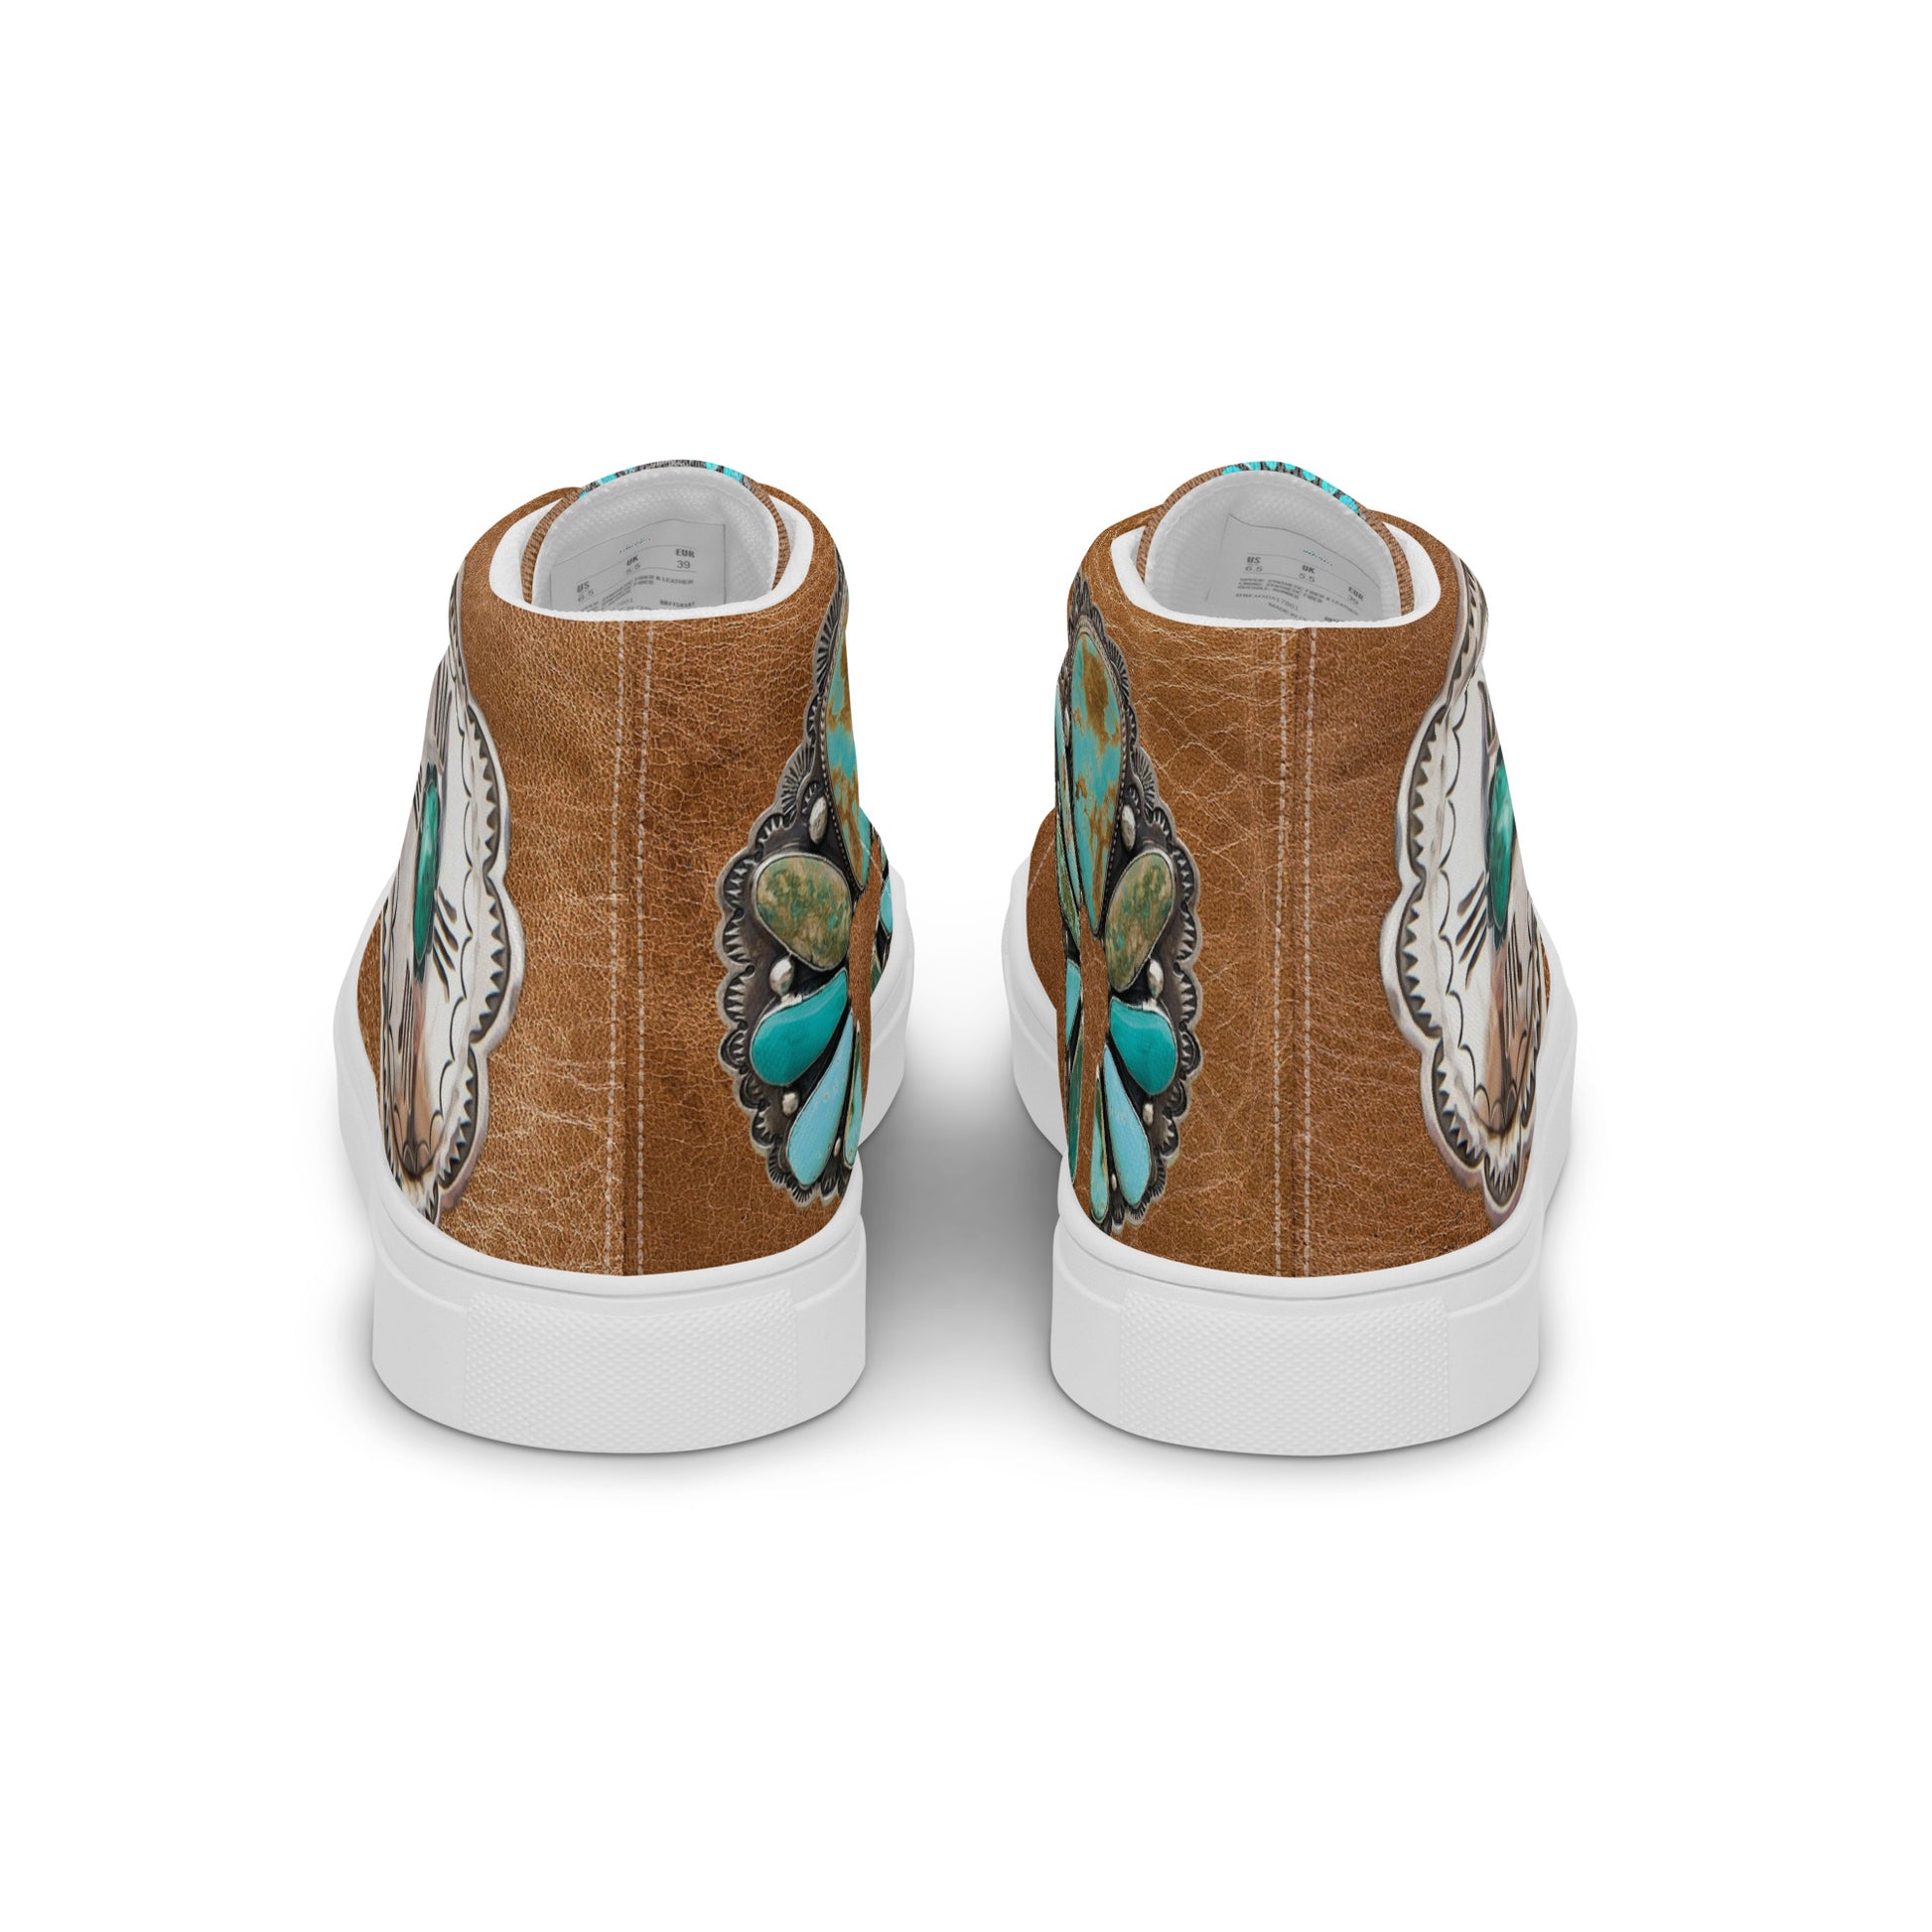 Turquoise Concho Women’s high top canvas shoes - concho, concho shoes, hightop, hightops, shoes, turquoise -  - Baha Ranch Western Wear